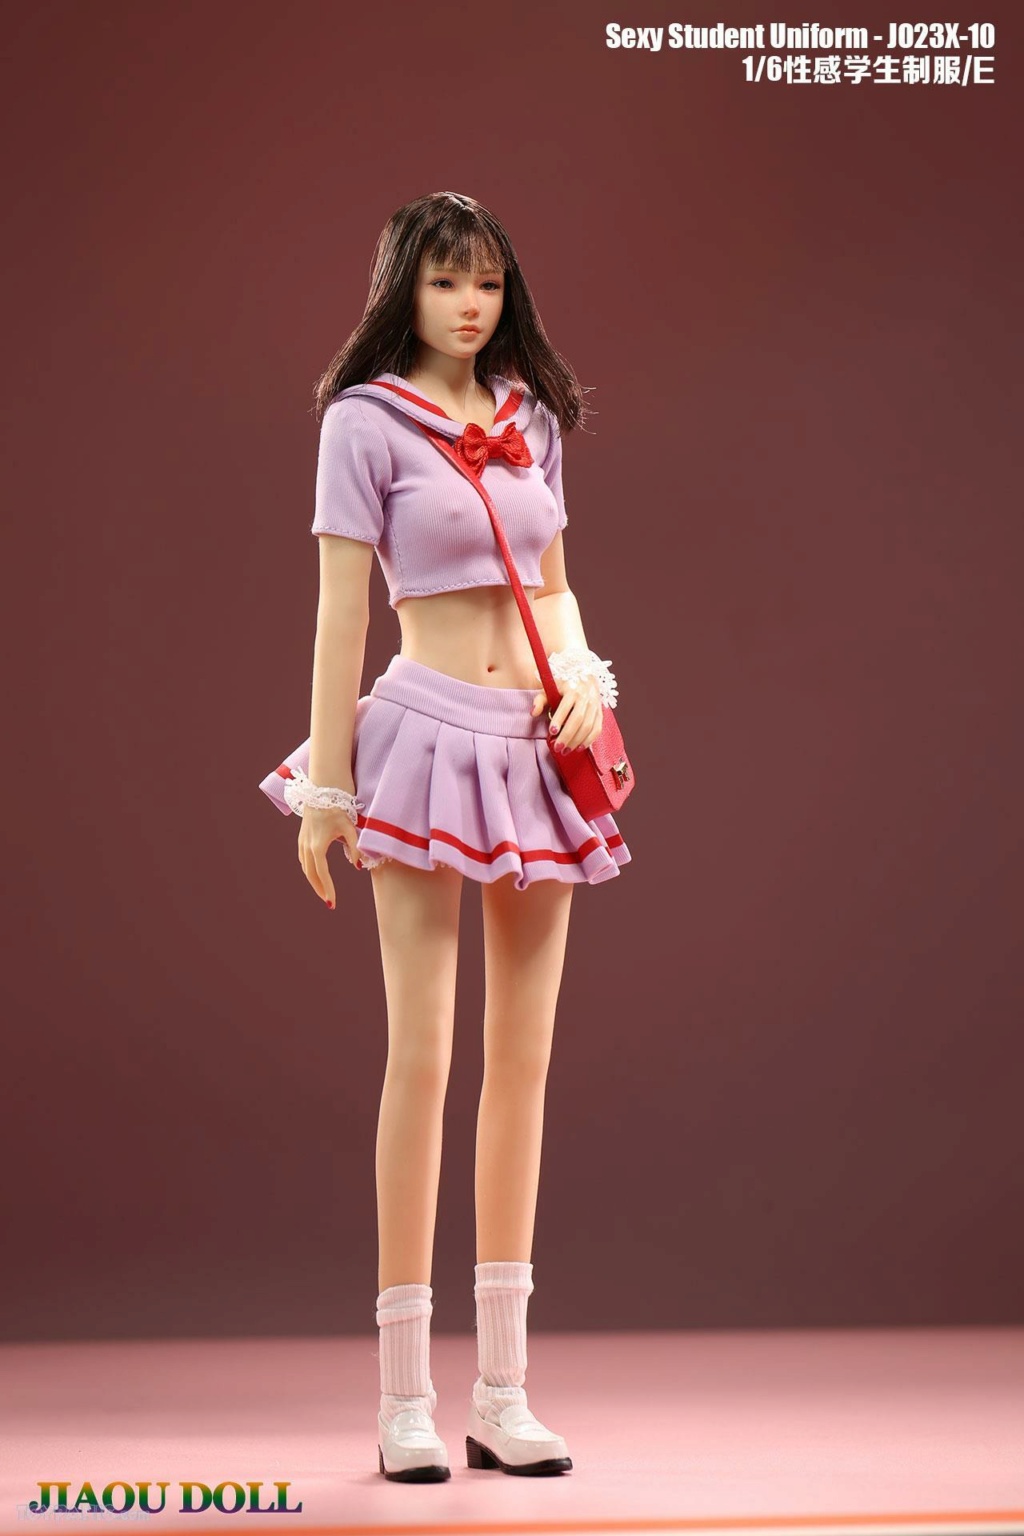 Clothing - NEW PRODUCT: Jiaou Doll: 1/6 Sexy Student Uniform (7 color options) (JO23X-10A-G) (NSFW) 20920235